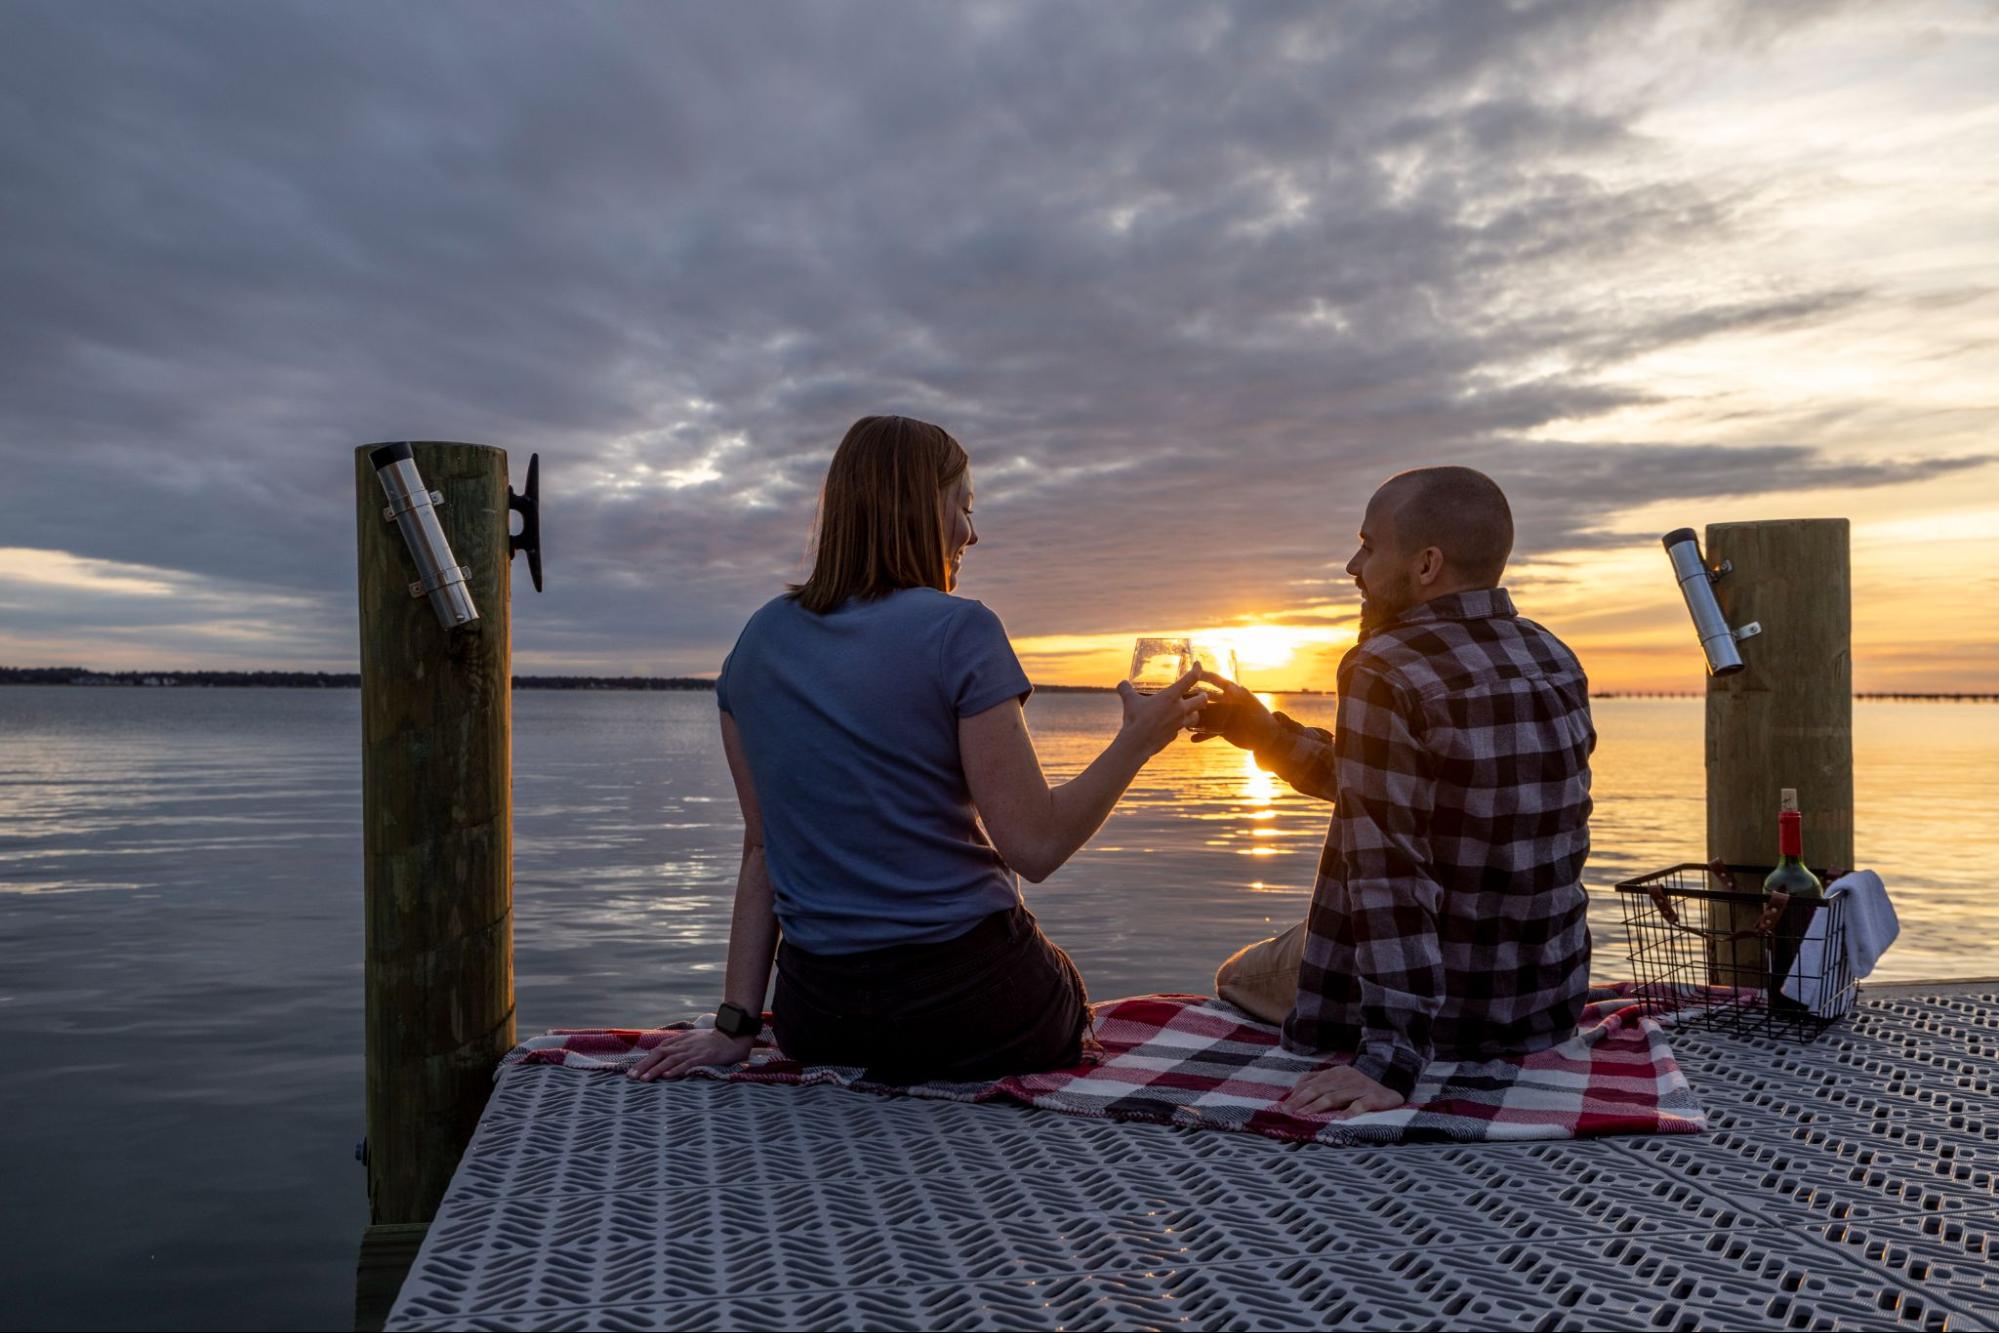 Two people are having a picnic on a dock at sunset. They are holding wine glasses and sitting on a blanket. 